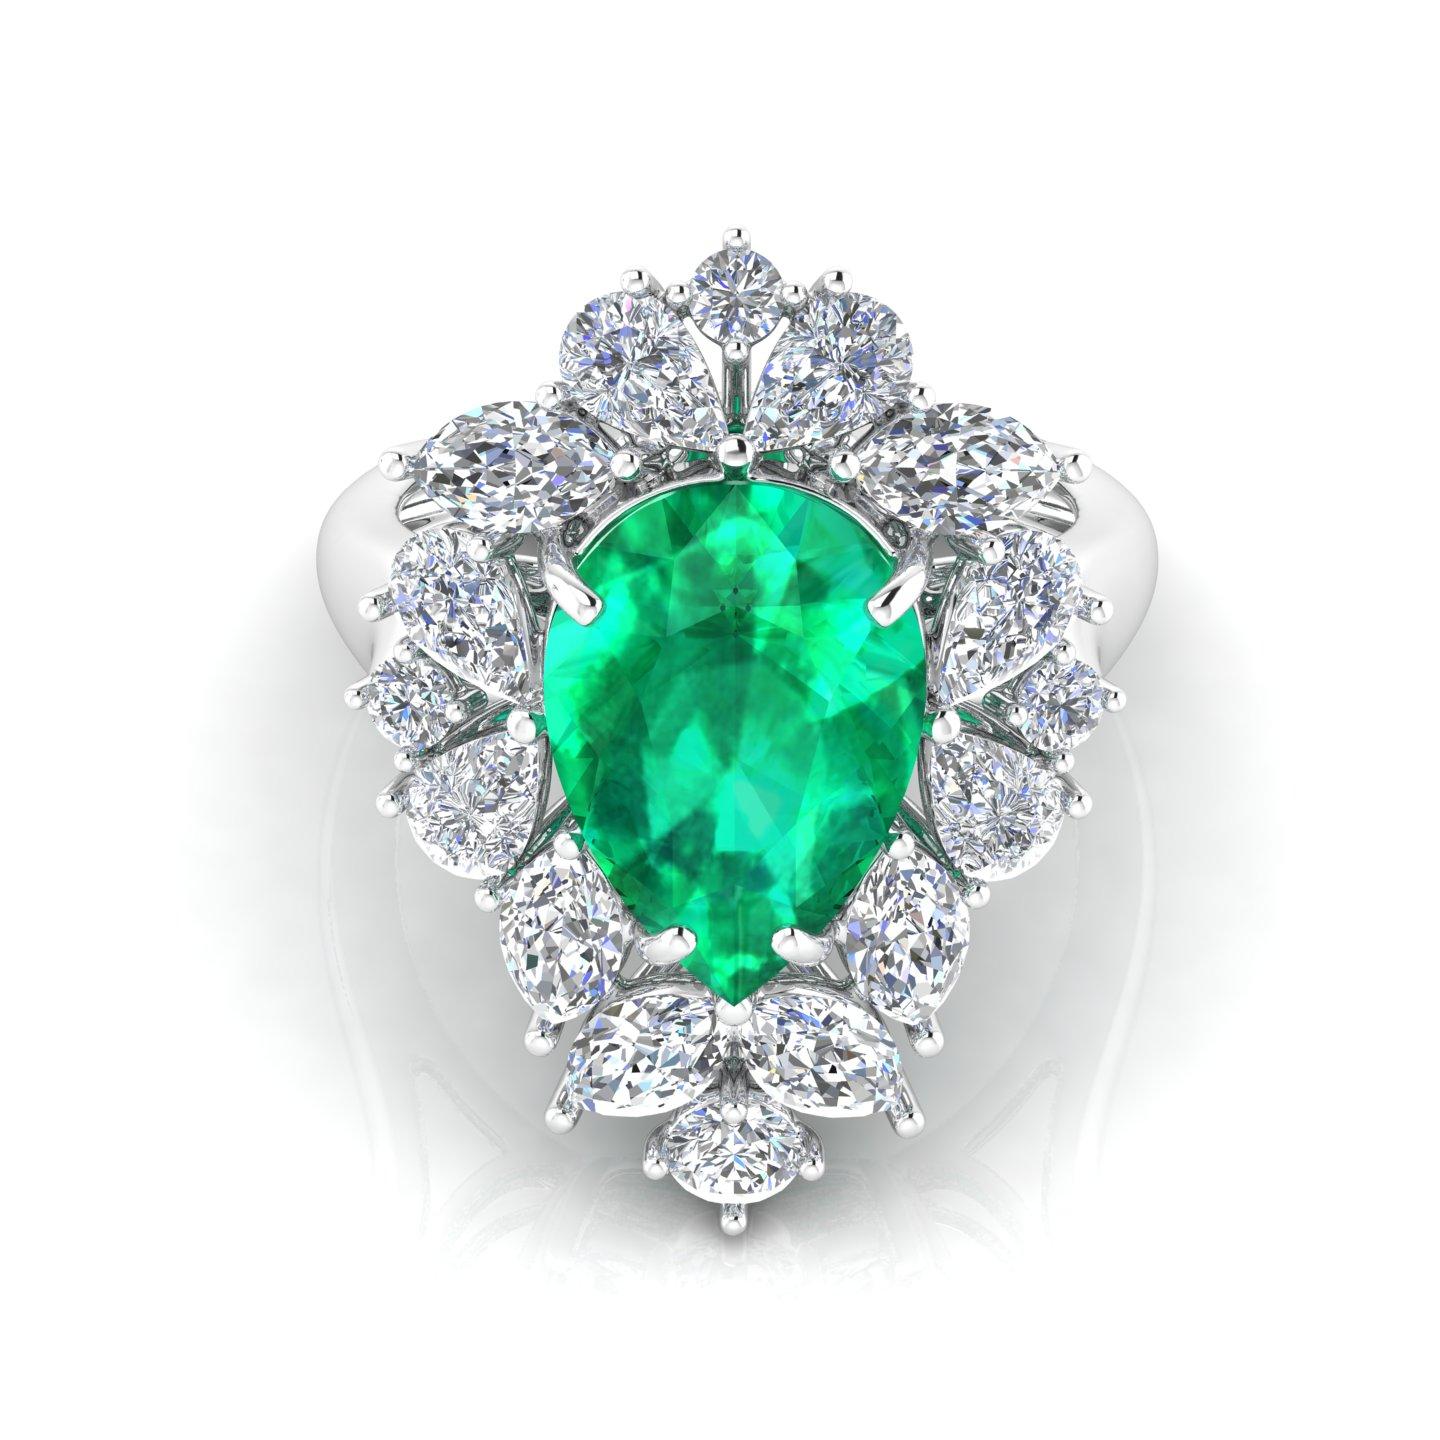 For Sale:  Pear Natural Emerald Gemstone Ring Diamond Solid 18k White Gold Fine Jewelry 7